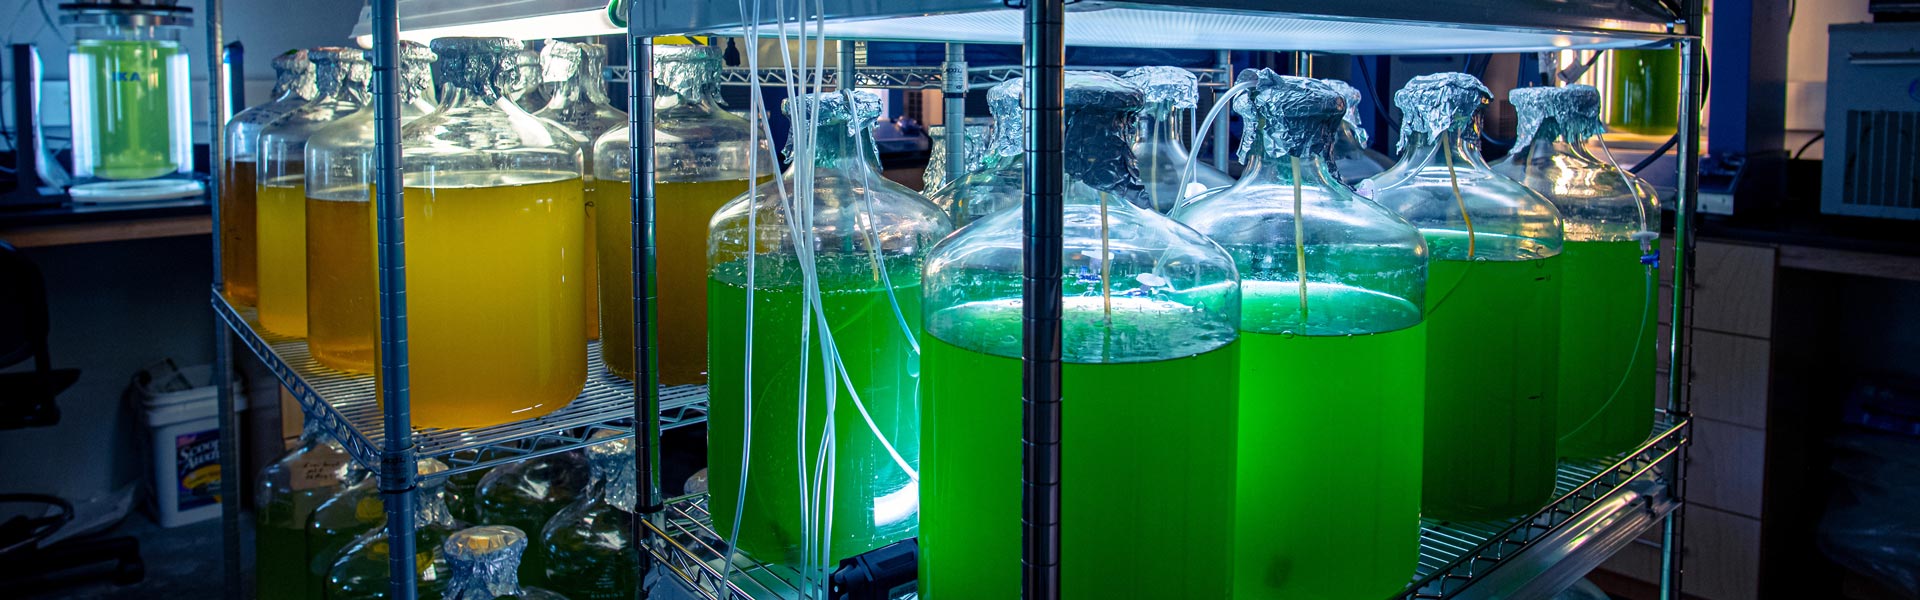 Green and orange algae growing in large glass containers